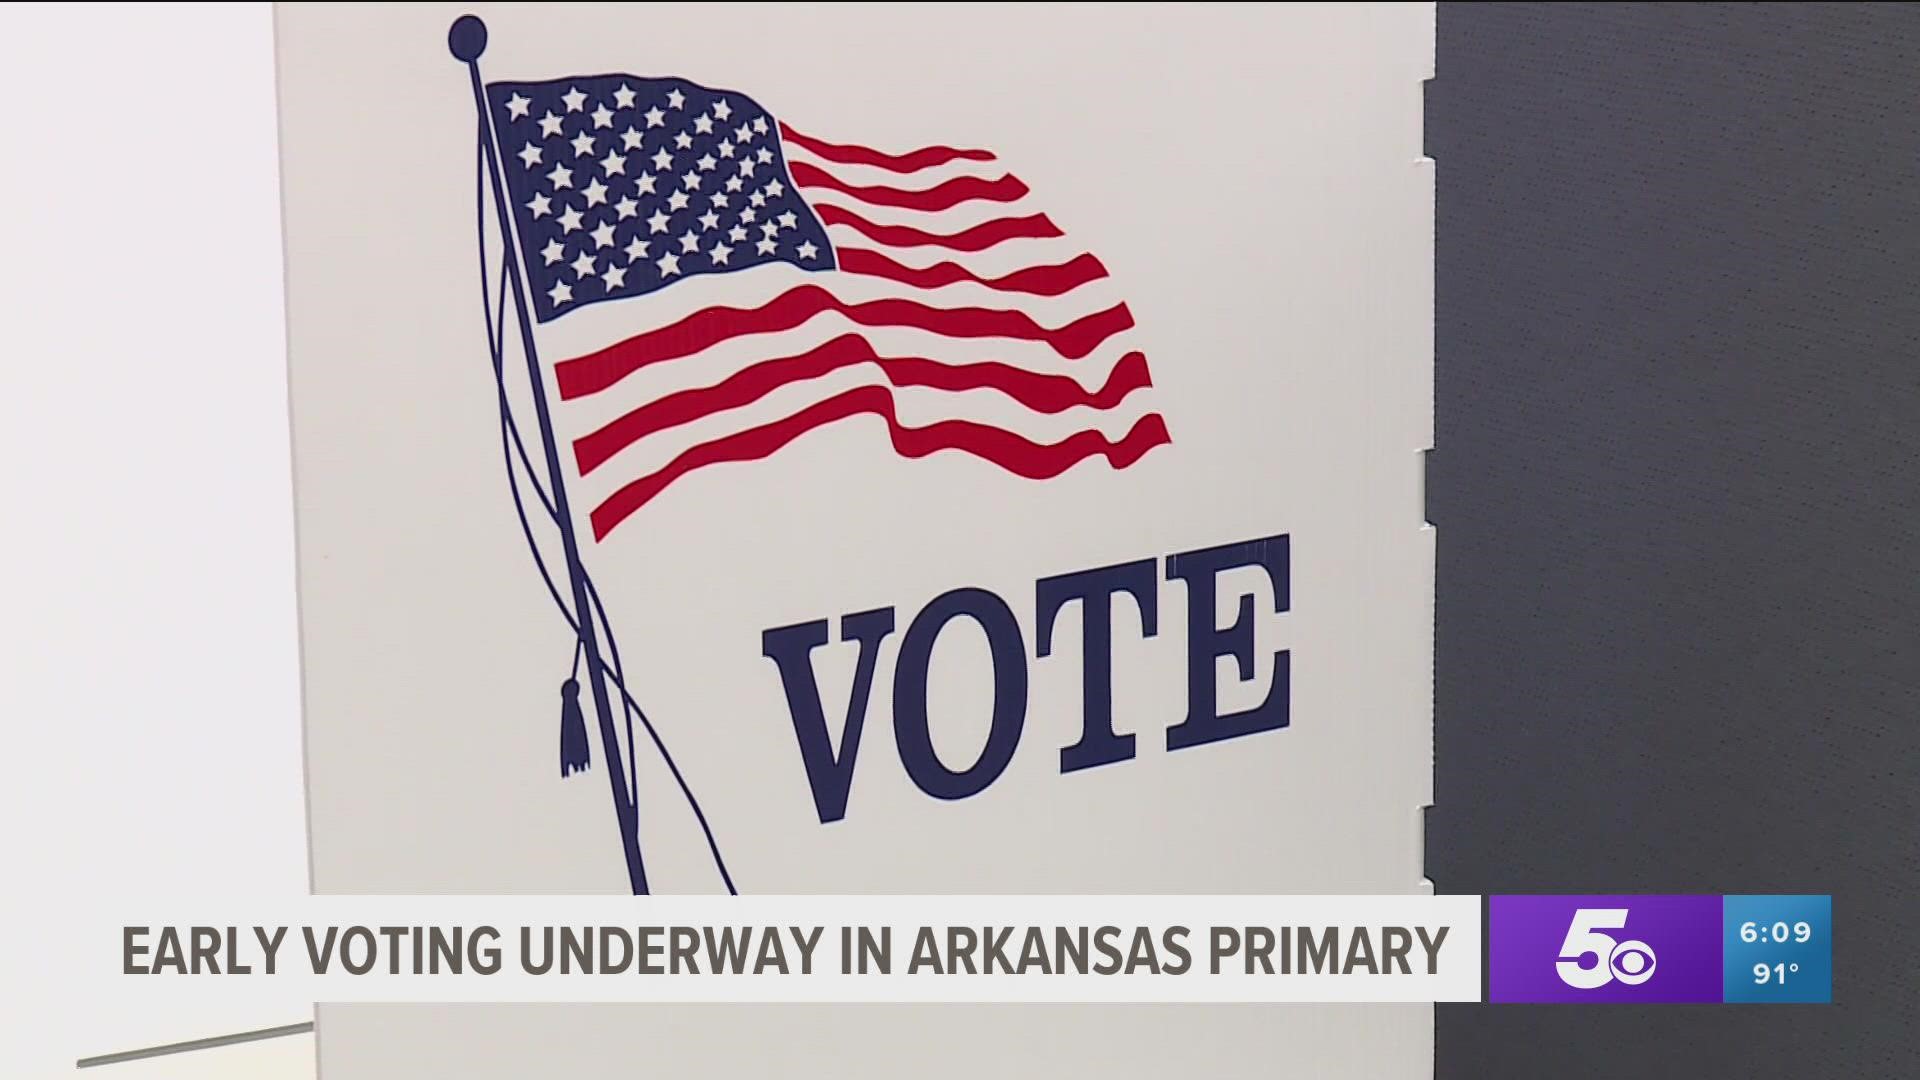 Officials are encouraging voters to cast their ballots in this year's primary elections.